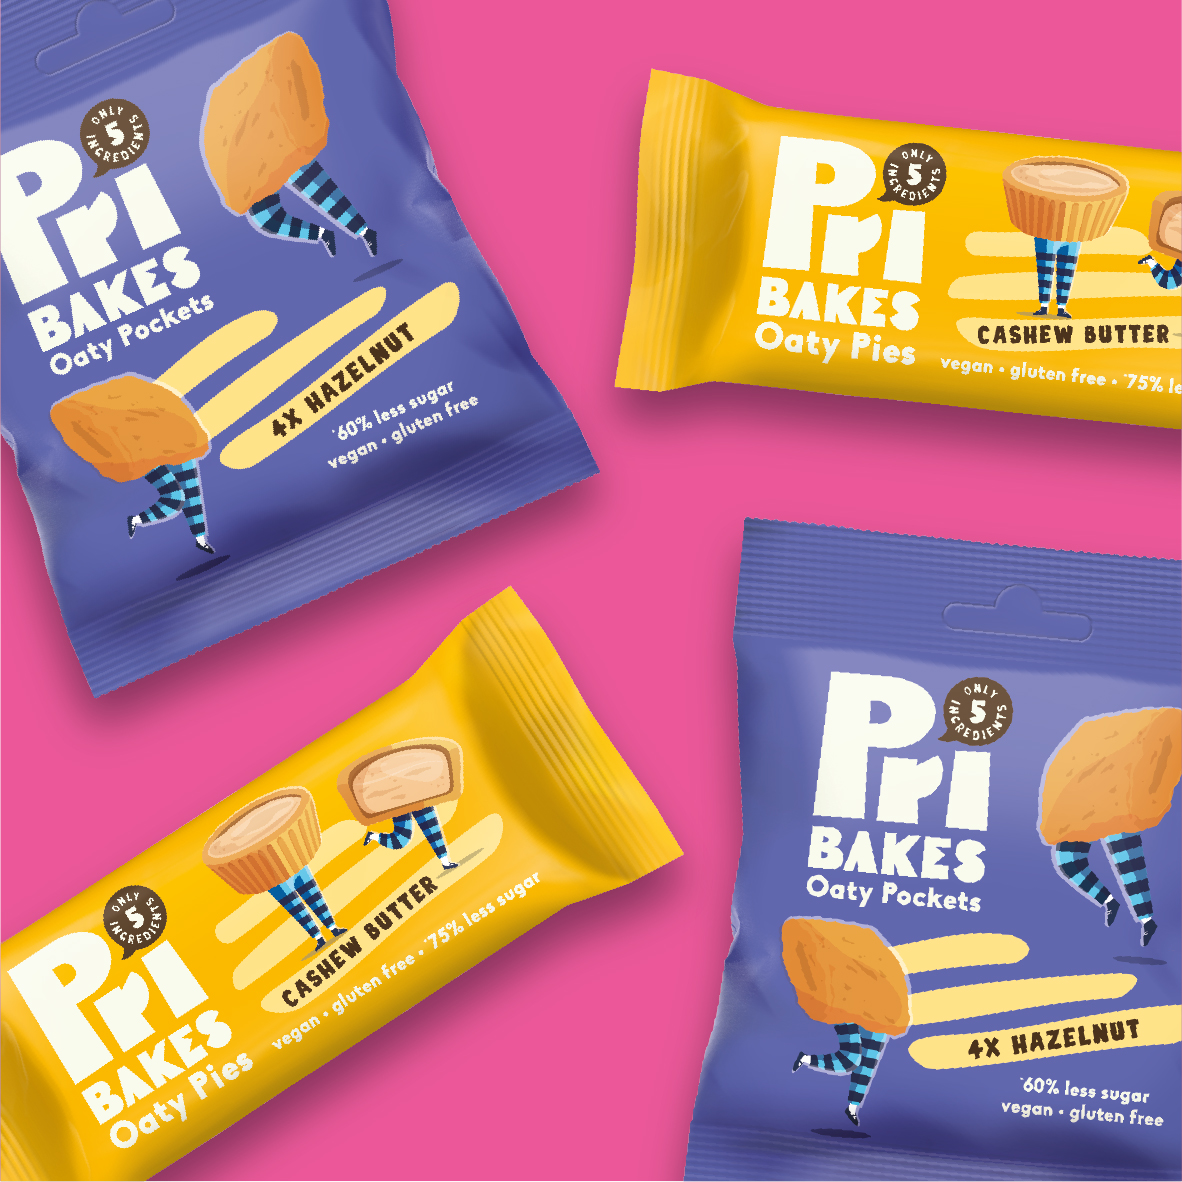 Pri’s Puddings – Putting The ‘Boogie Back Into Bakery’